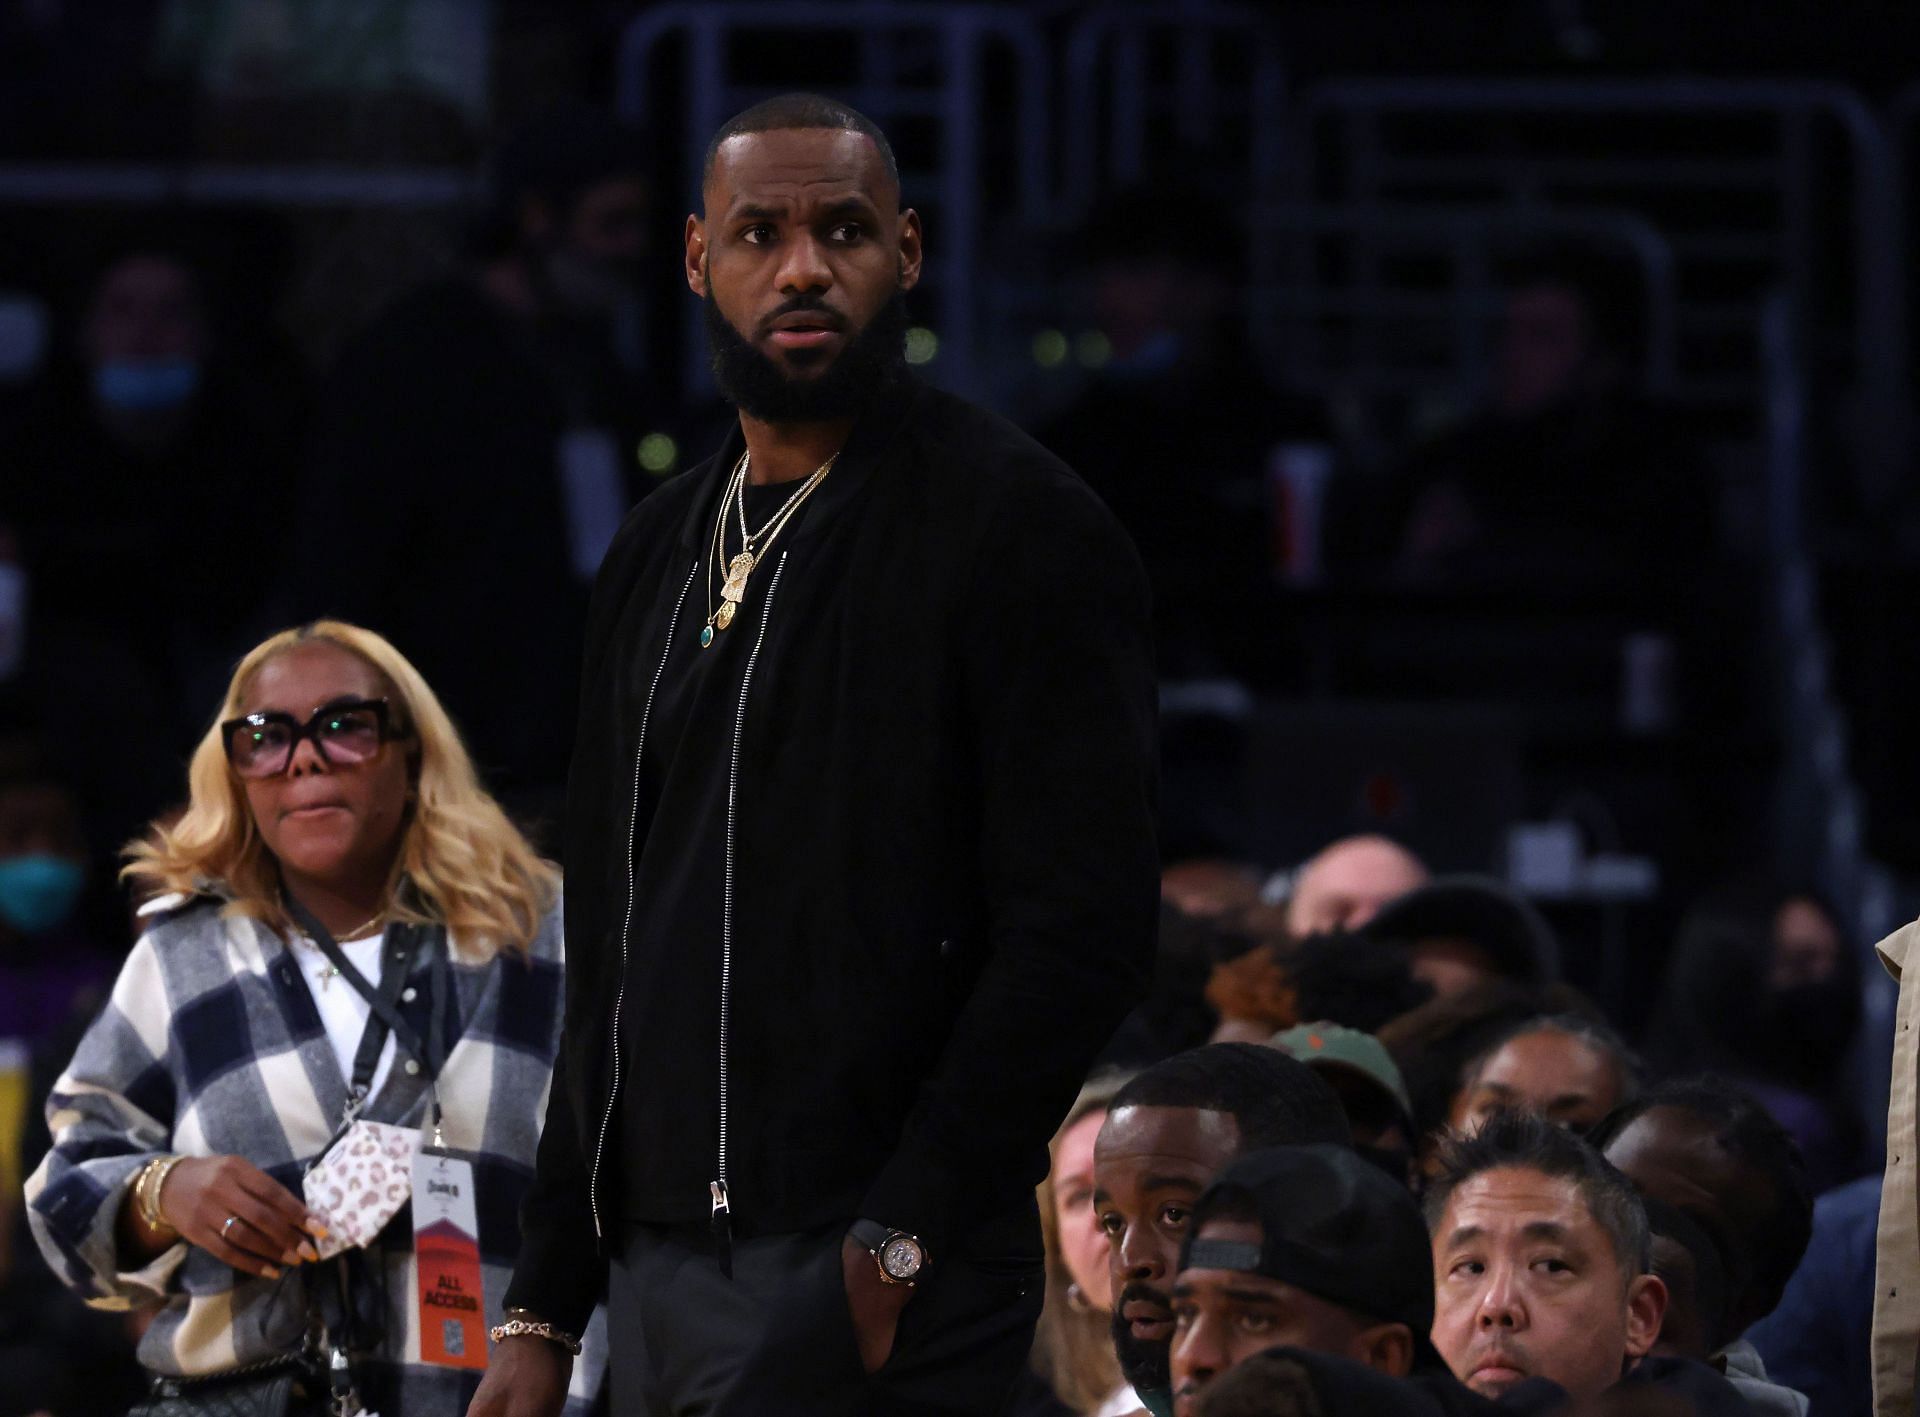 LeBron James #6 of the Los Angeles Lakers courtside to watch the game between Sierra Canyon and St. Vincent - St. Mary during The Chosen-1&#039;s Invitational at Staples Center on December 04, 2021 in Los Angeles, California.